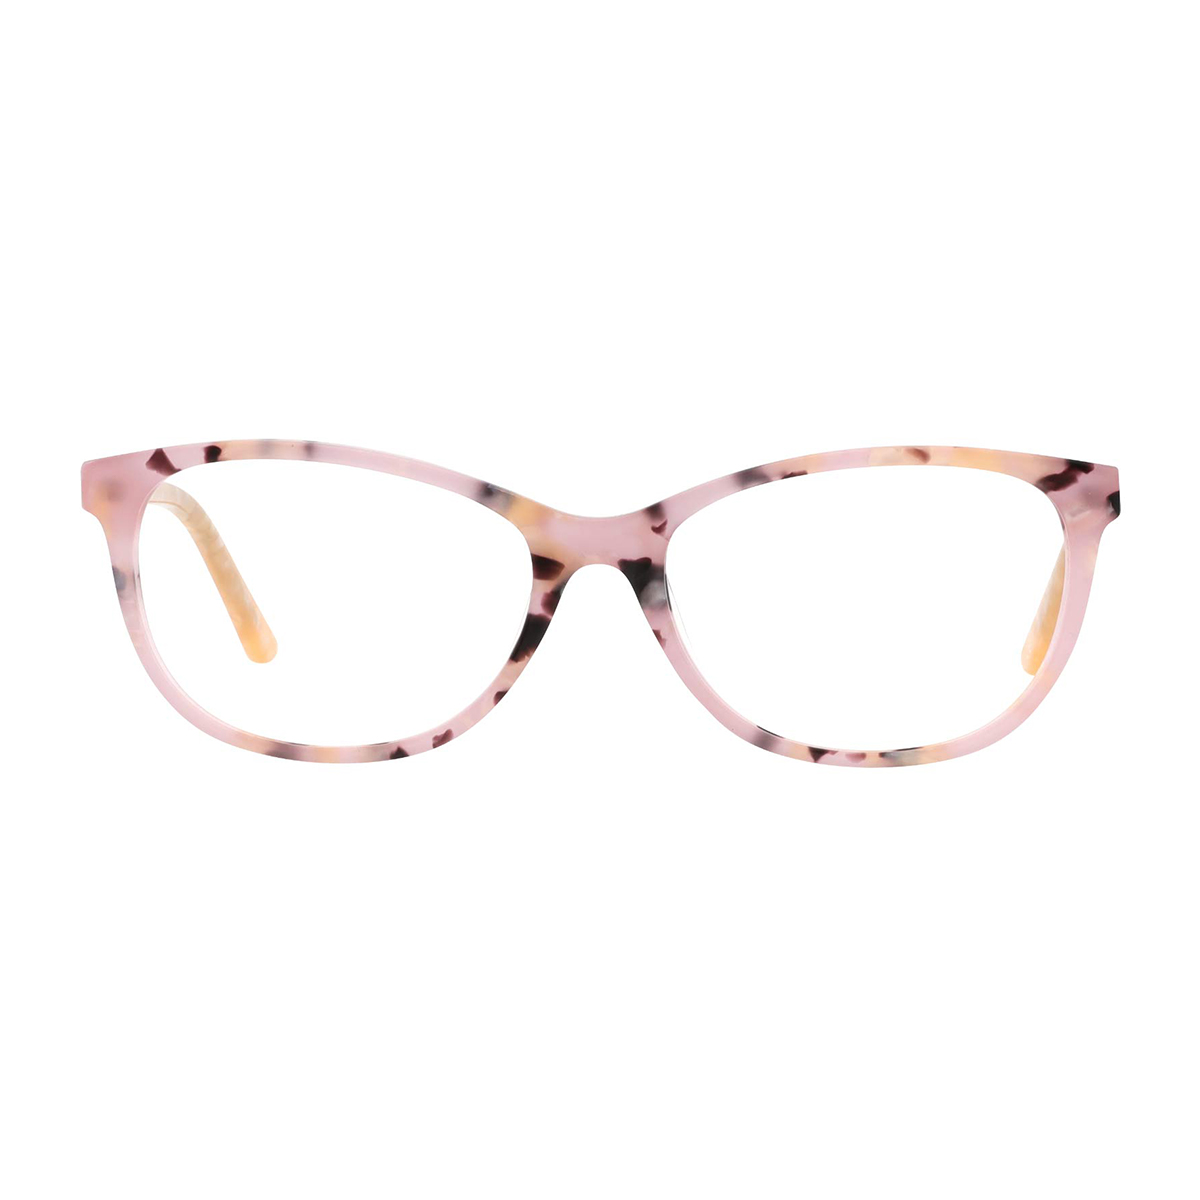 oval demi-pink reading-glasses